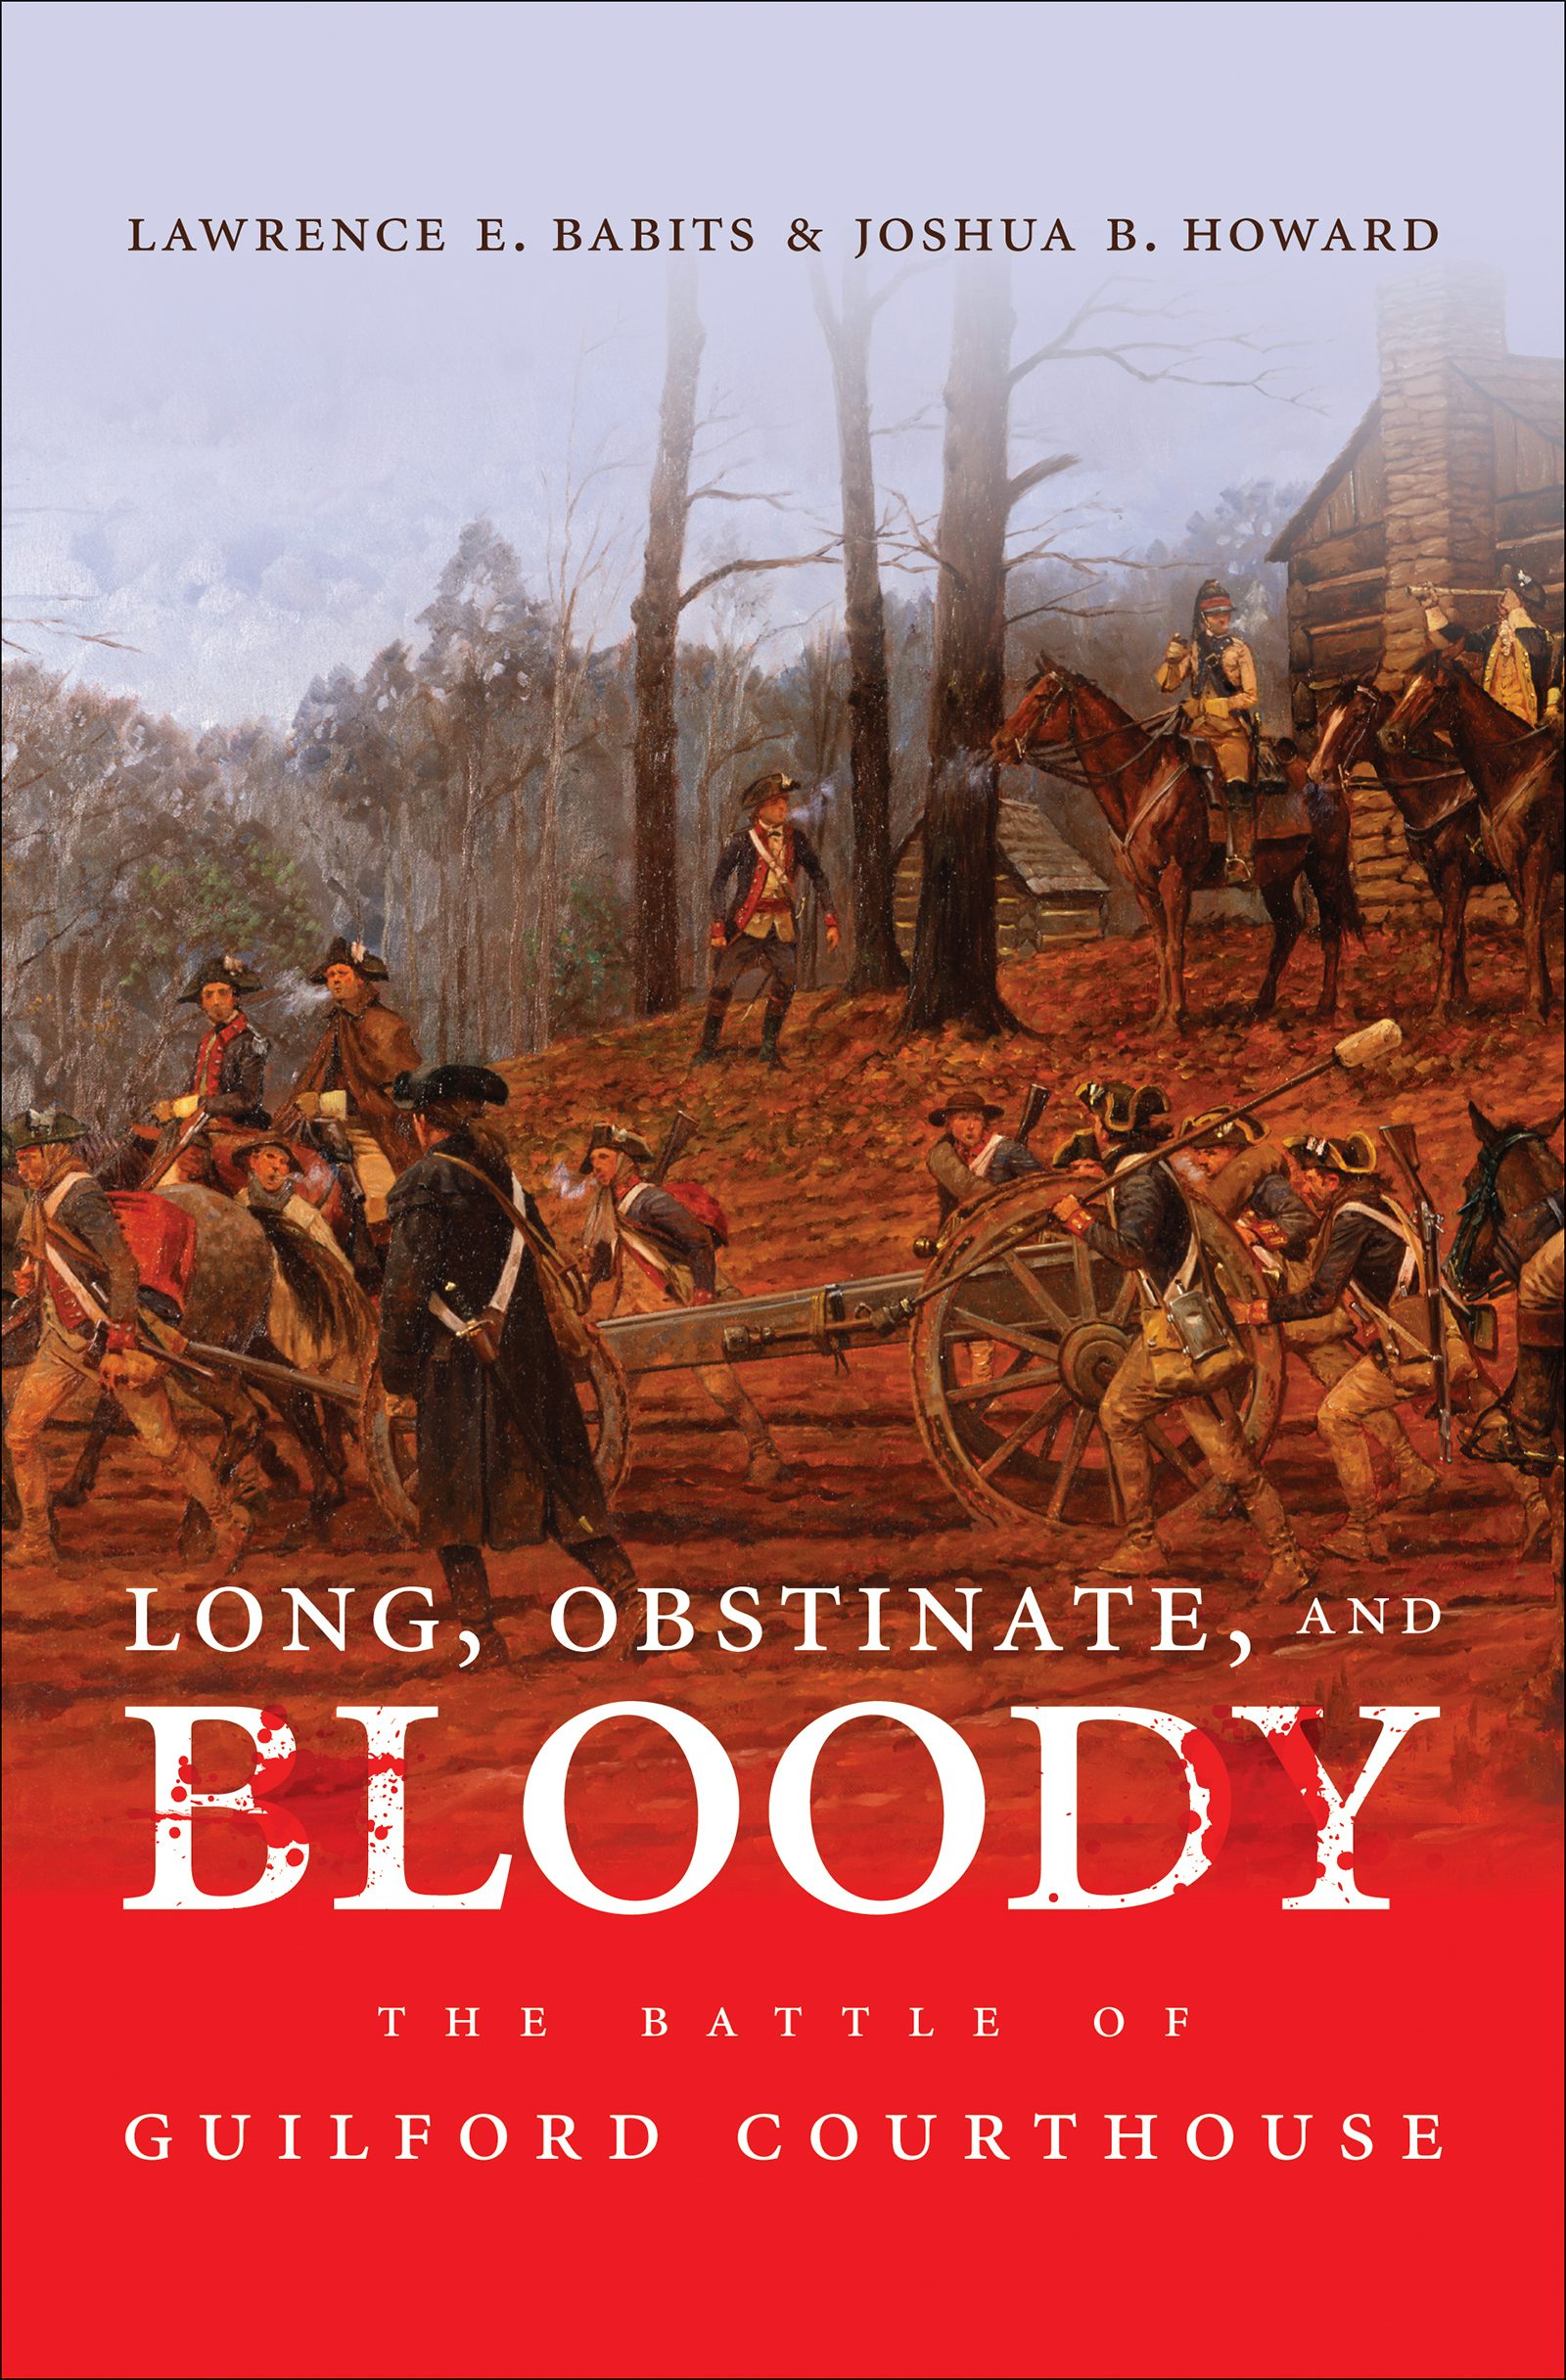 Long, Obstinate, and Bloody by Lawrence E. Babits